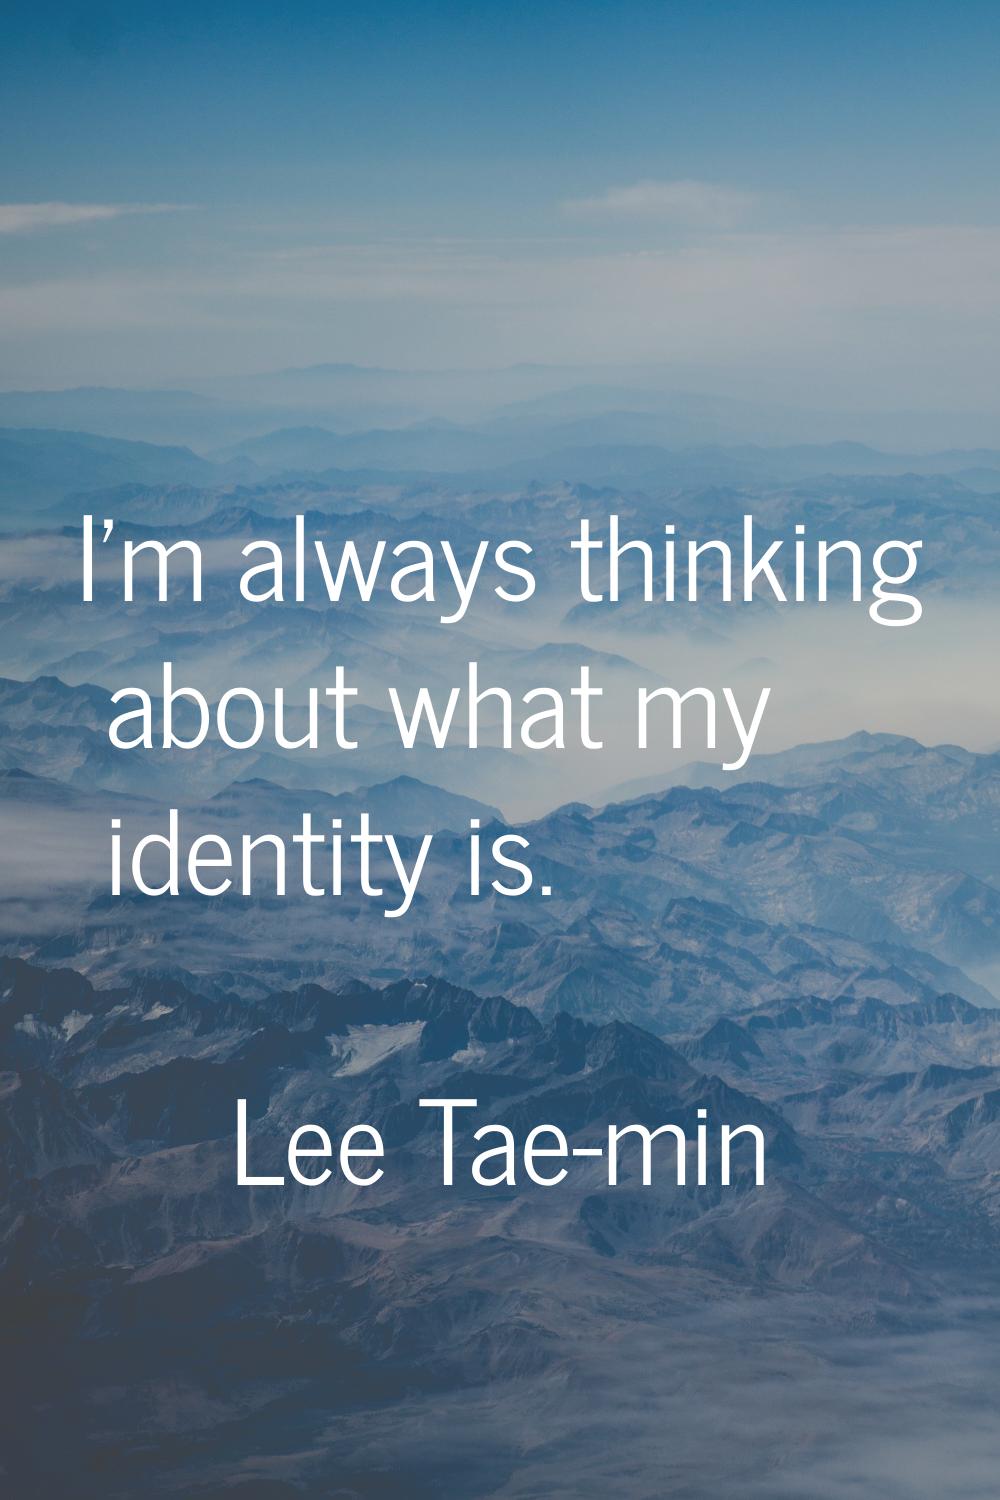 I'm always thinking about what my identity is.